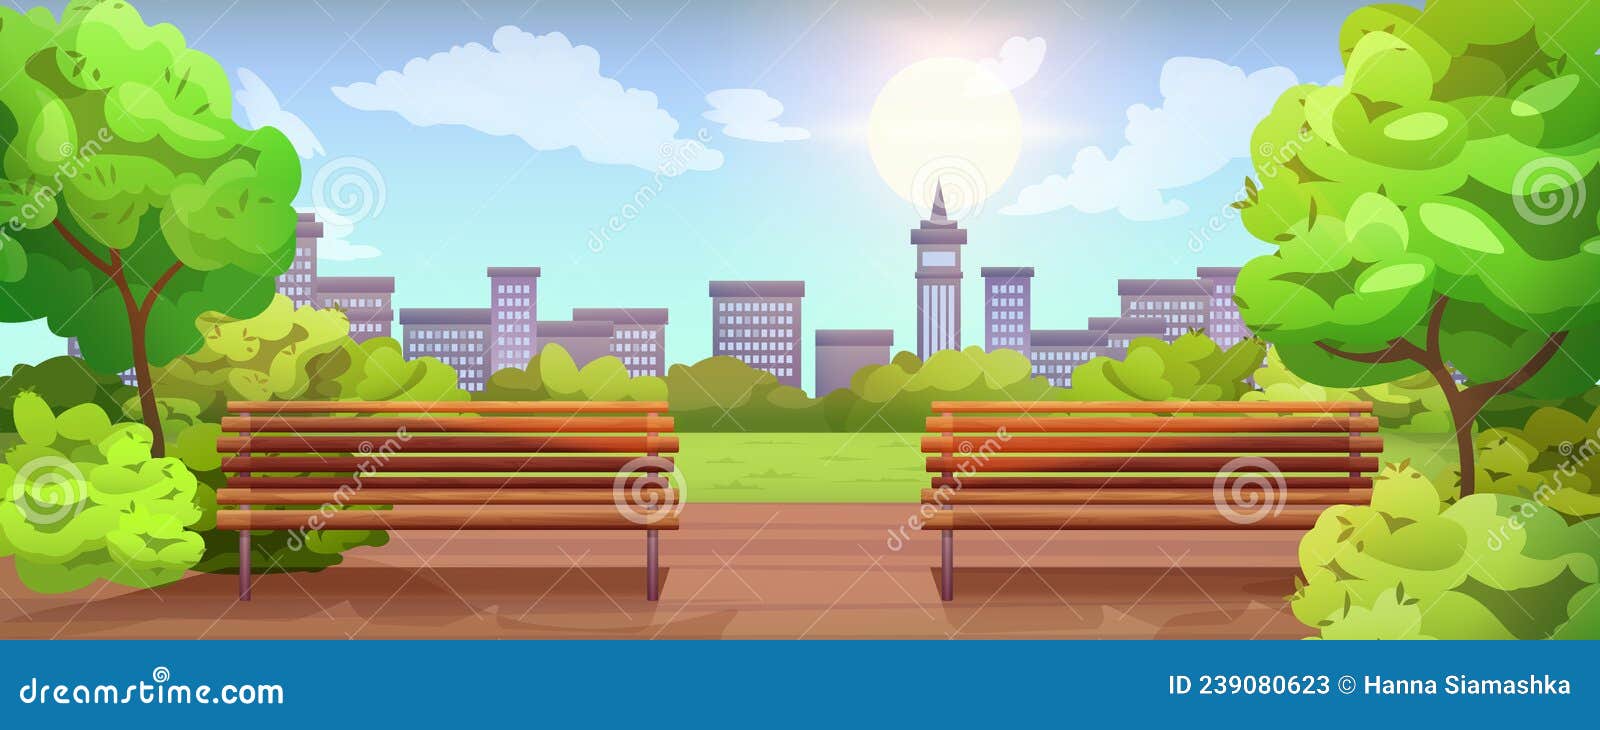 Cartoon Empty City Park with Wooden Bench and Lanterns Stock ...